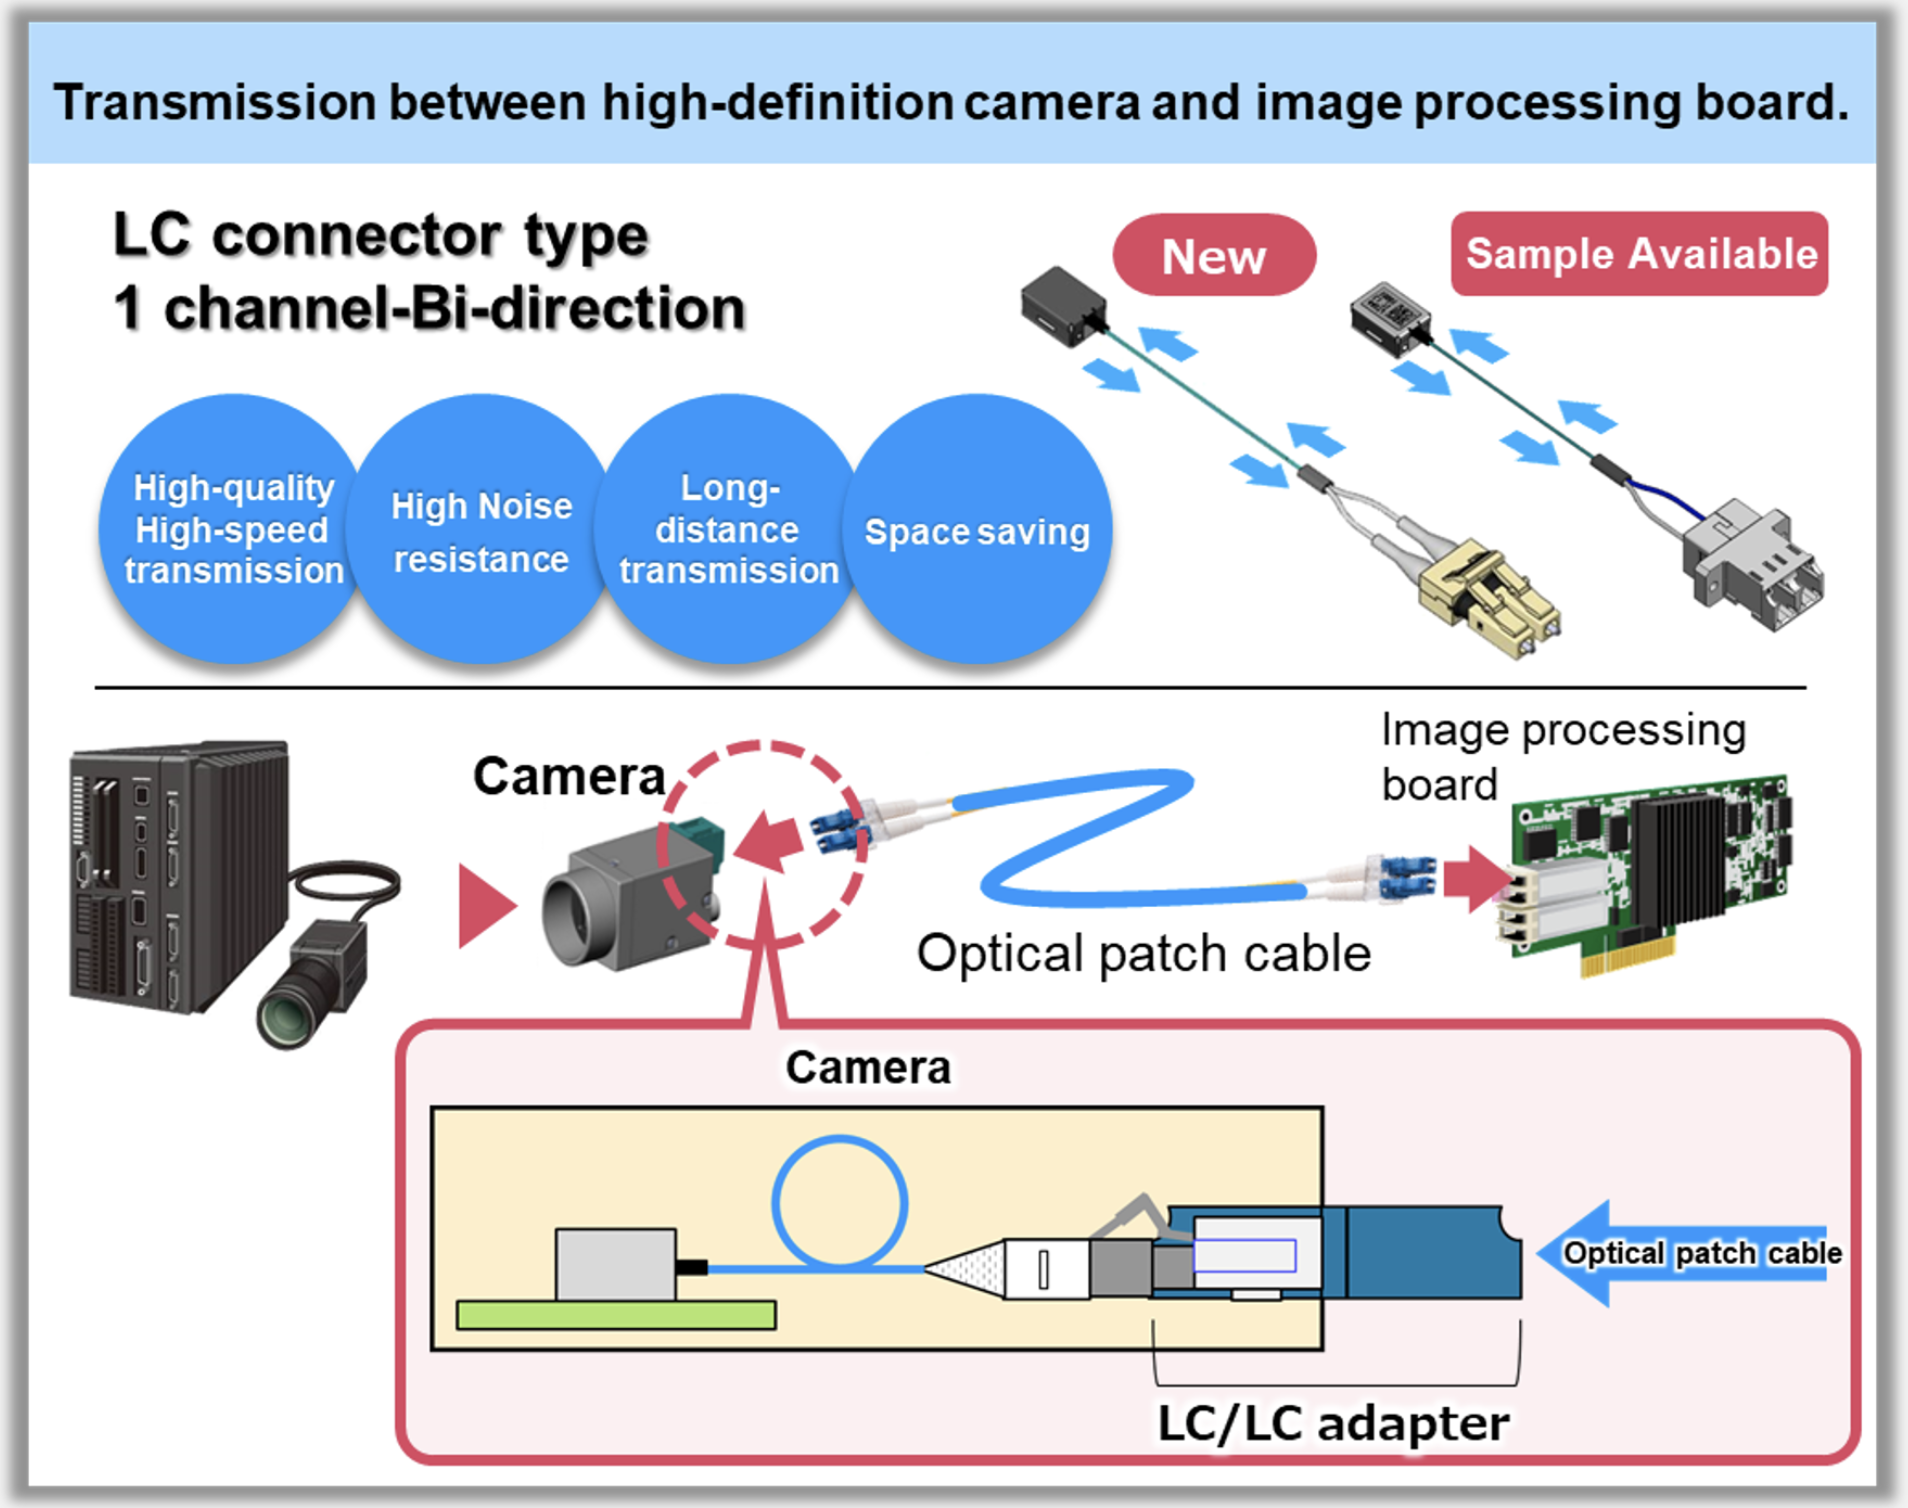 Active Optical Connector V series (AOC) Case Study Factory Automation camera: Transmission between high-definition camera and image processing board., High-quality High-speed transmission, High Noise resistance, Long-distance transmission and Space saving.